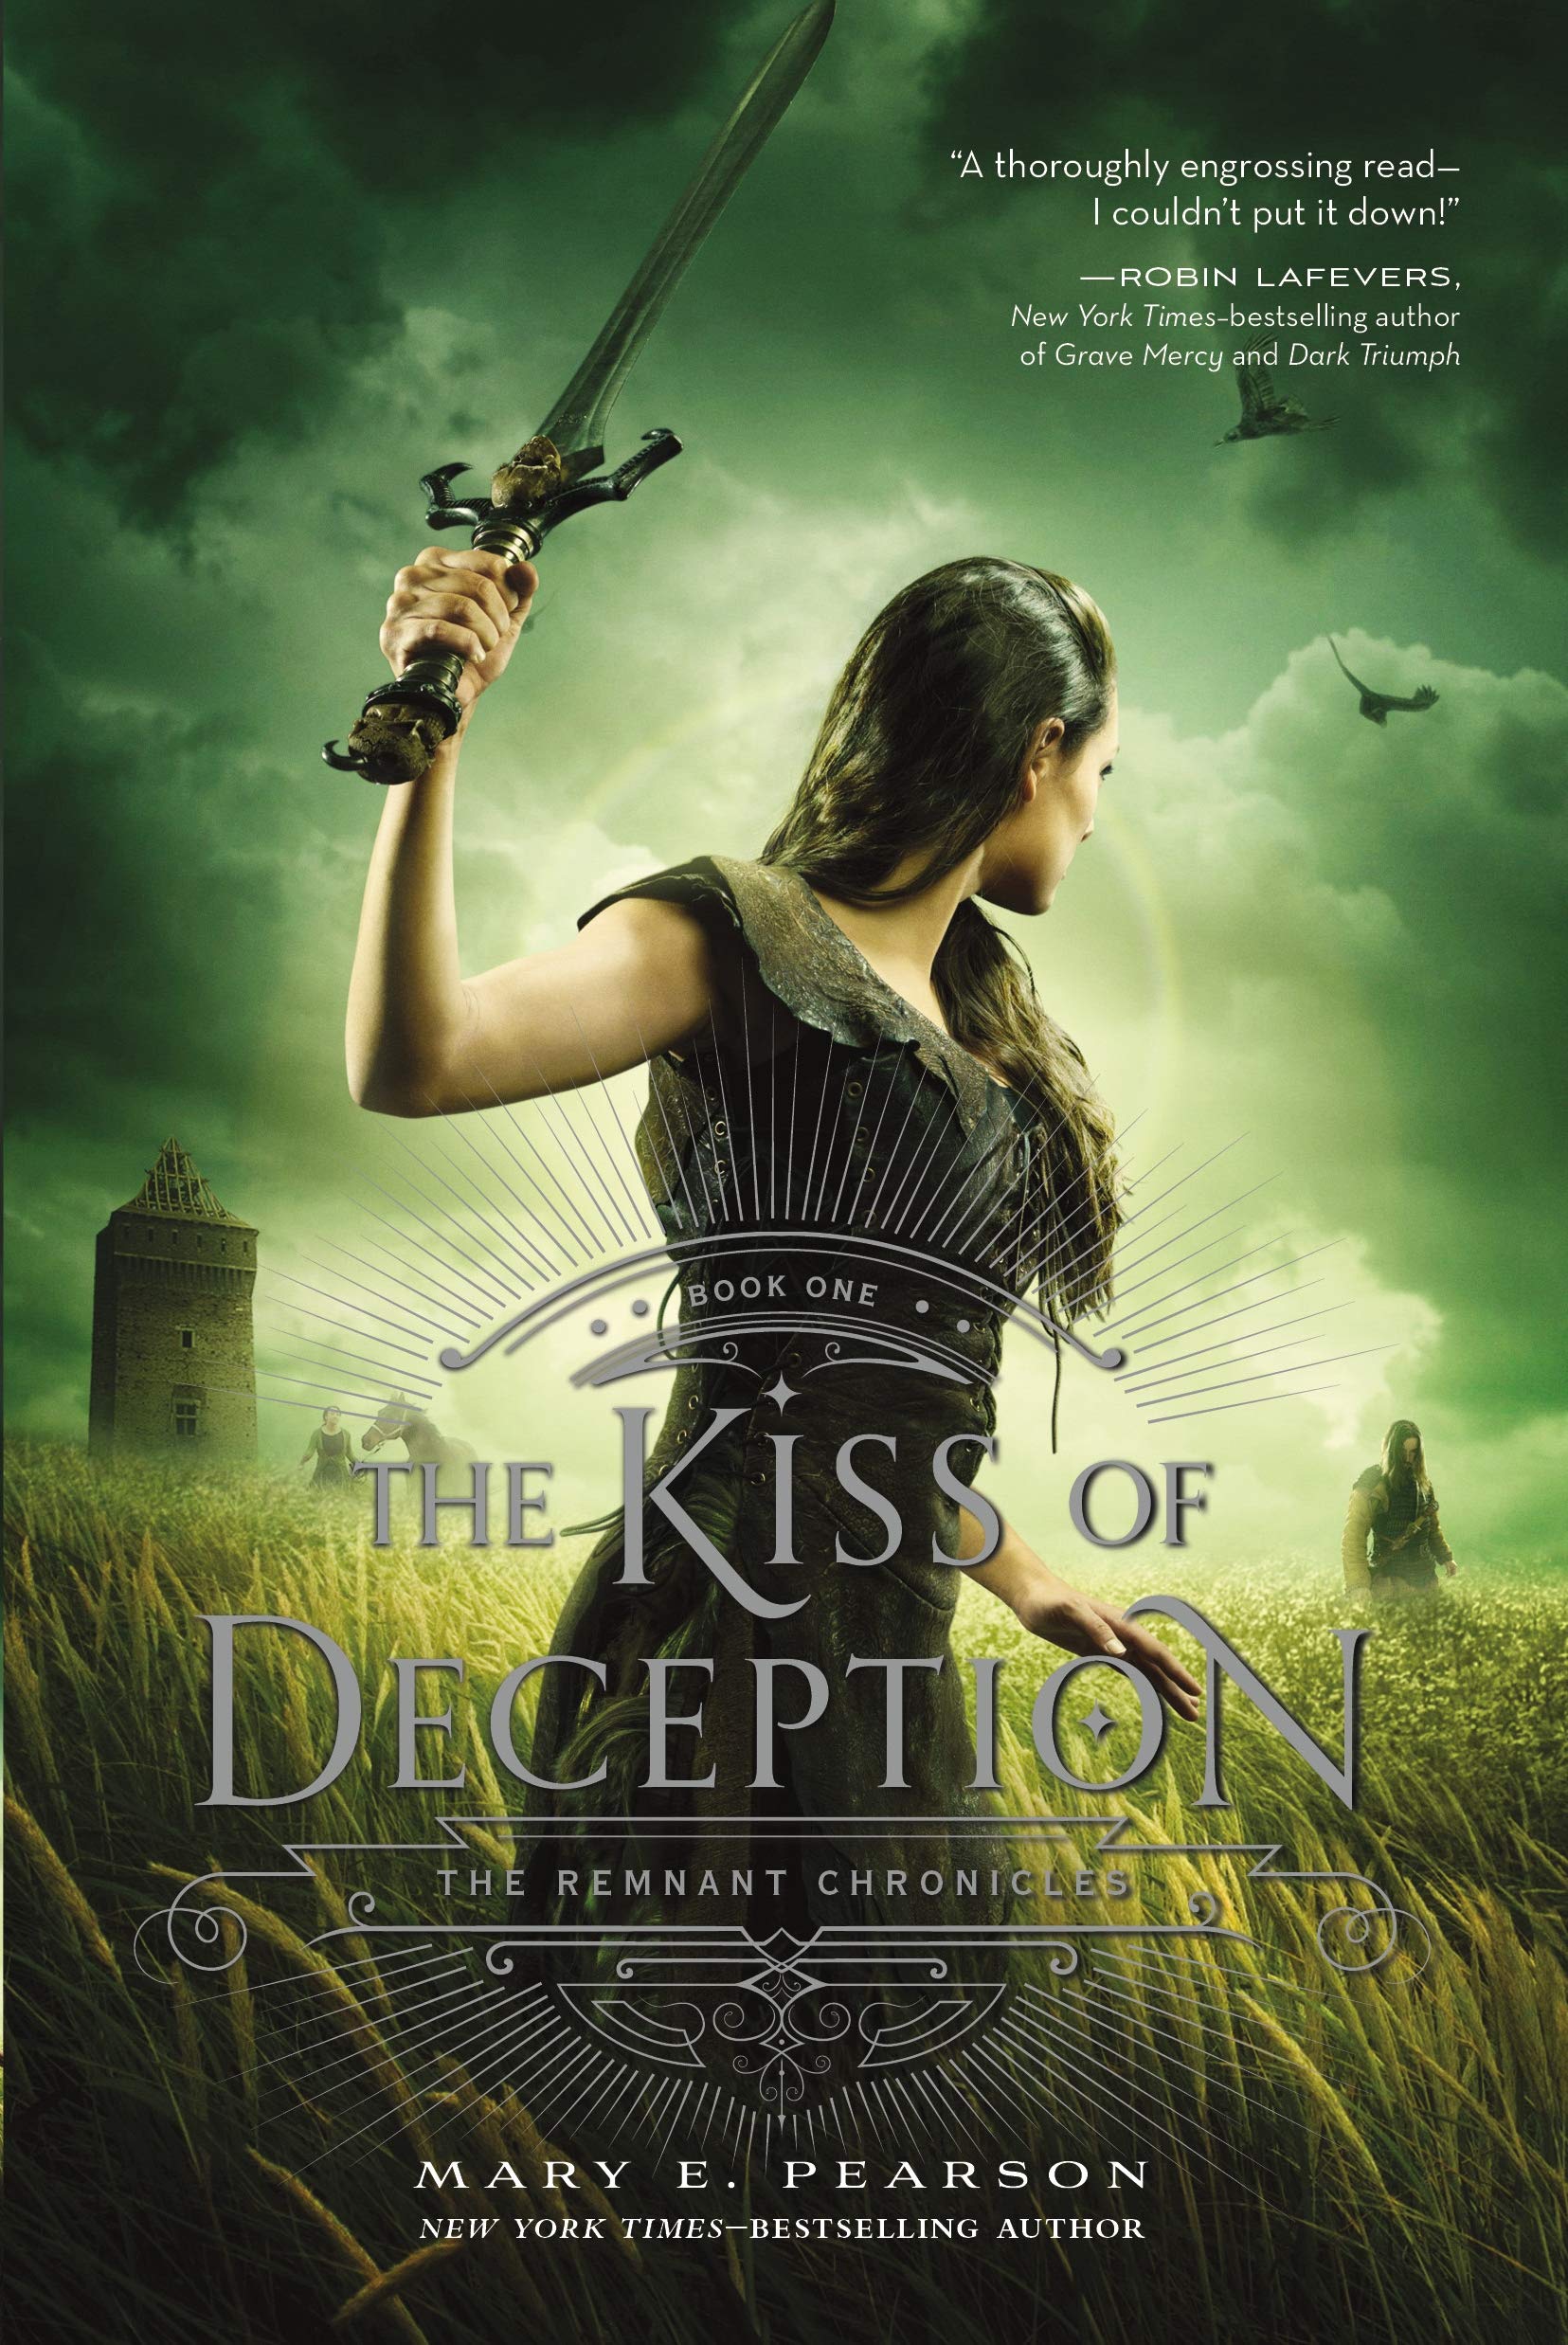 Cover image of The Kiss of Deception by Mary E. Pearson.